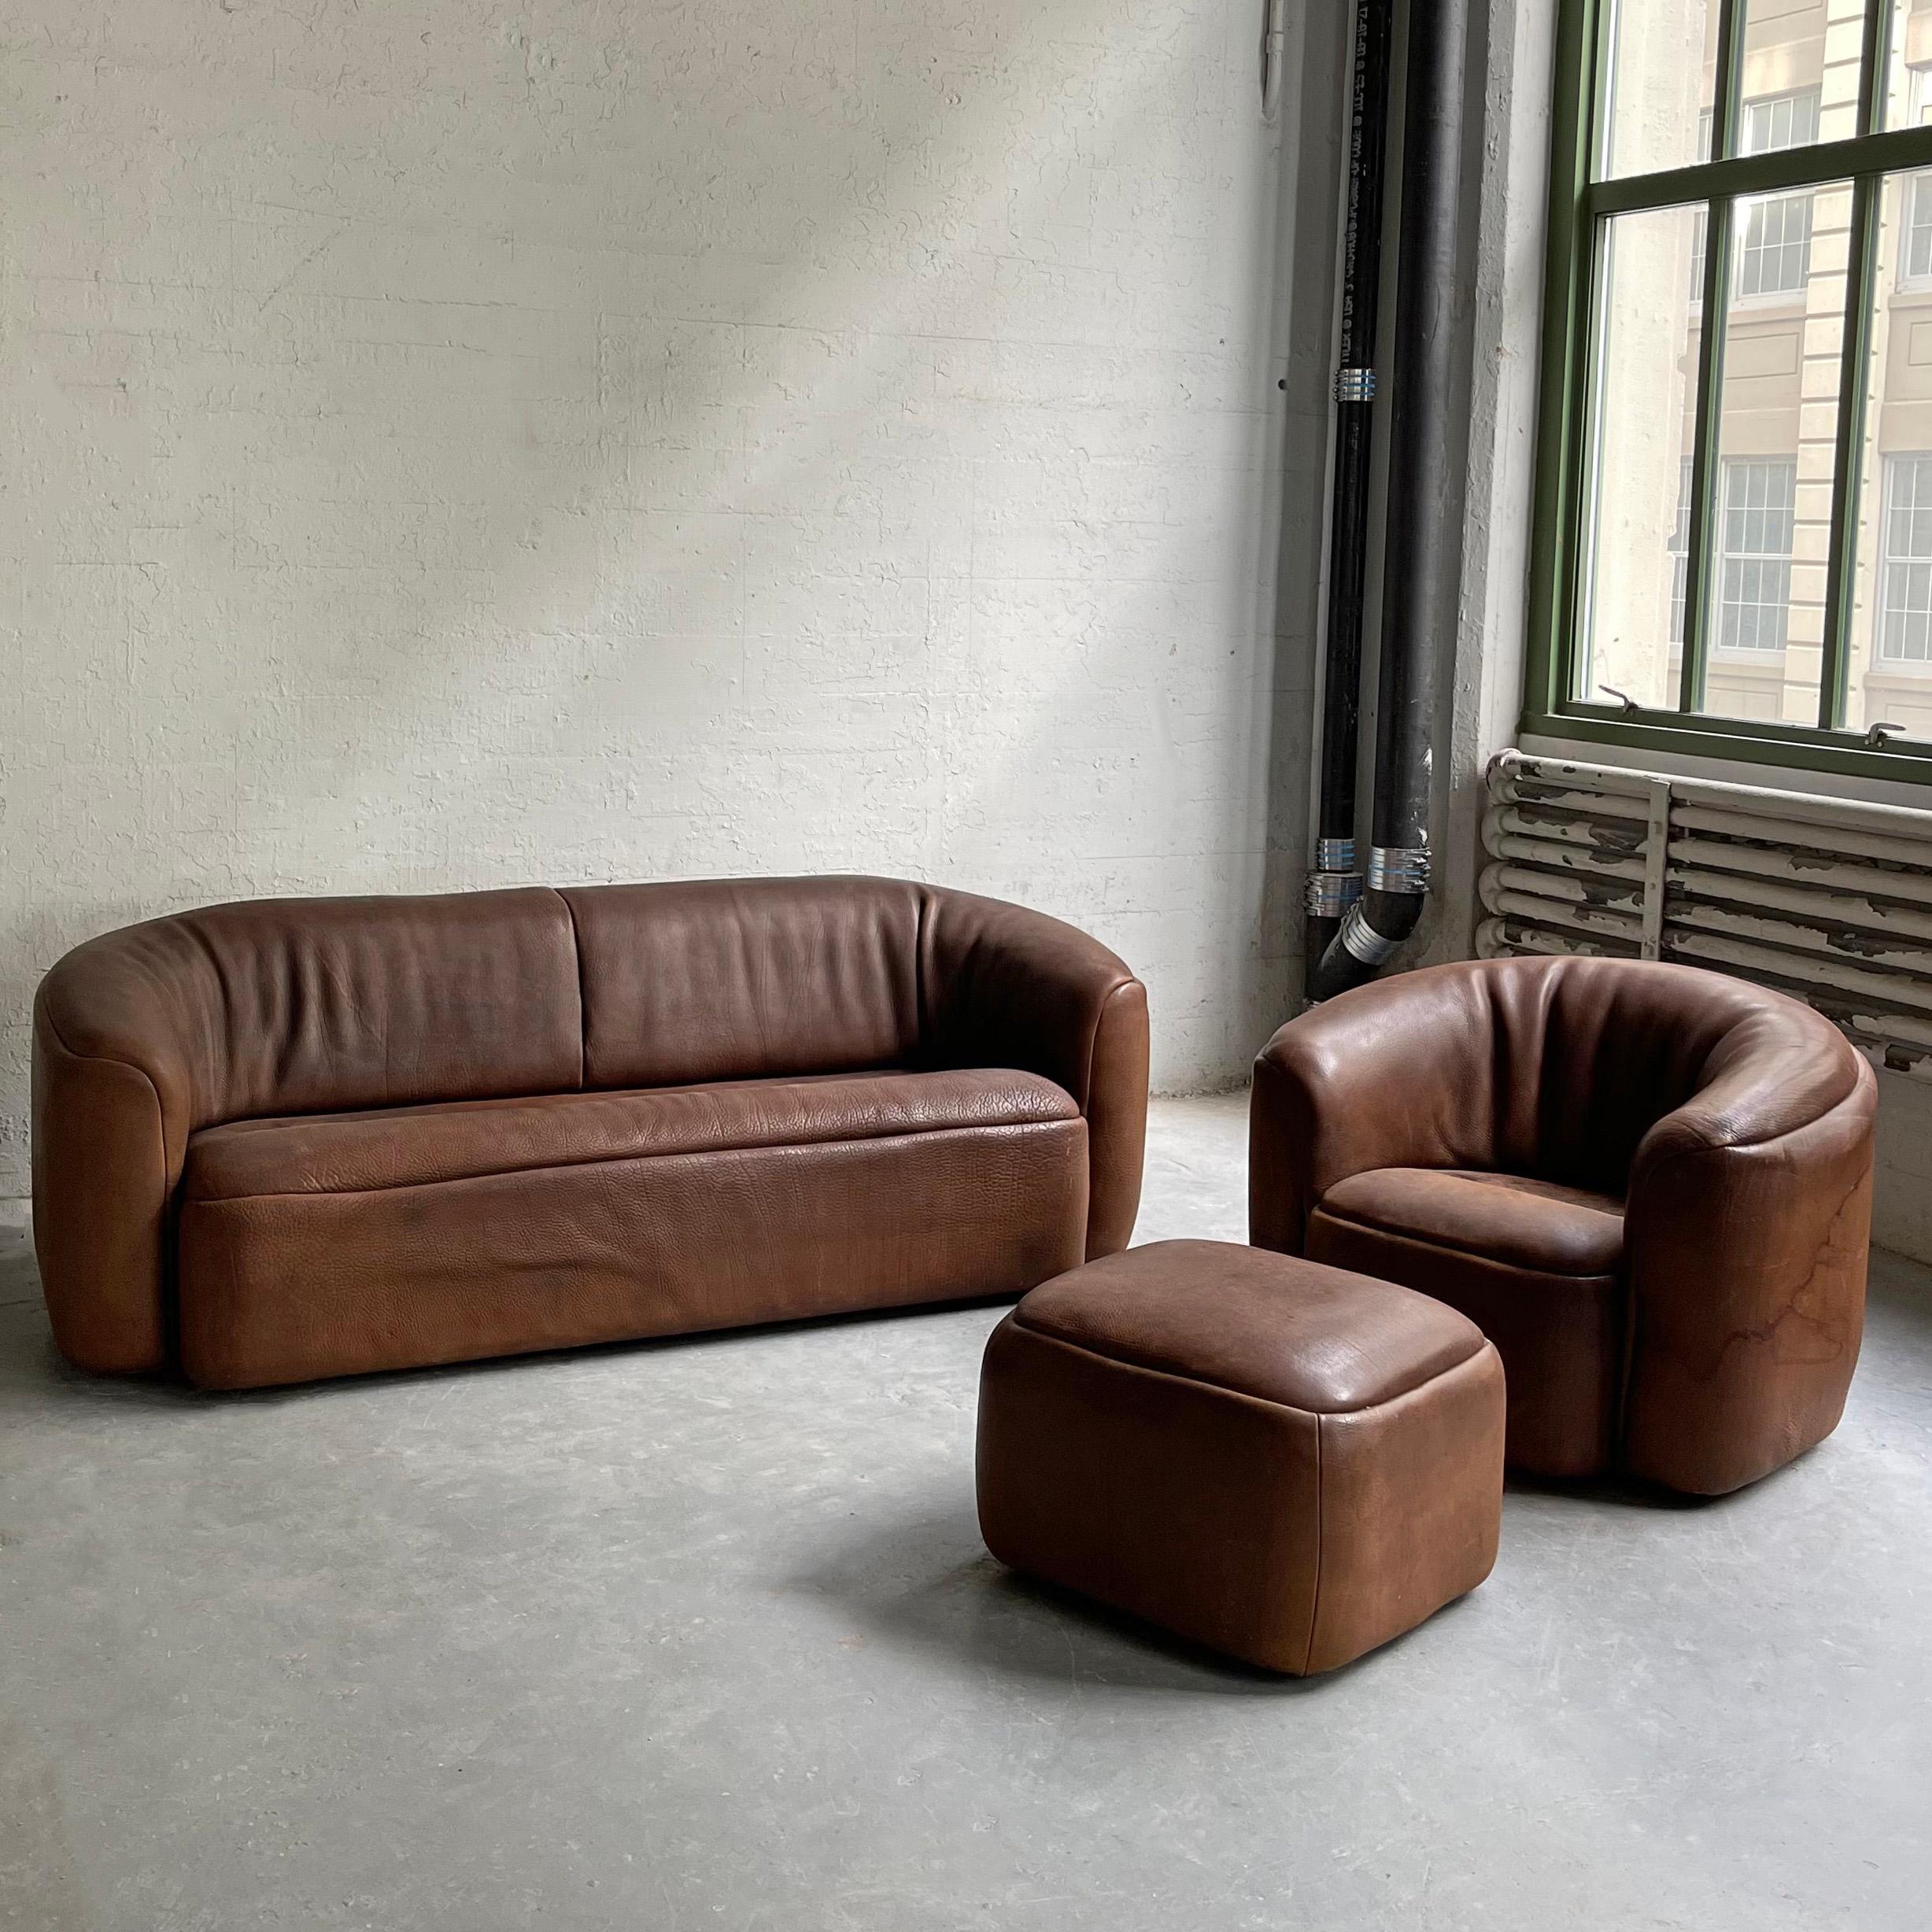 Handsome, rustic, 3 piece, buffalo hide sofa seating set includes a three seater sofa, club chair and ottoman. The durable, patinated buffalo hide features an earthy, brown tone with a deep textured grain that is soft and supple to the touch. The